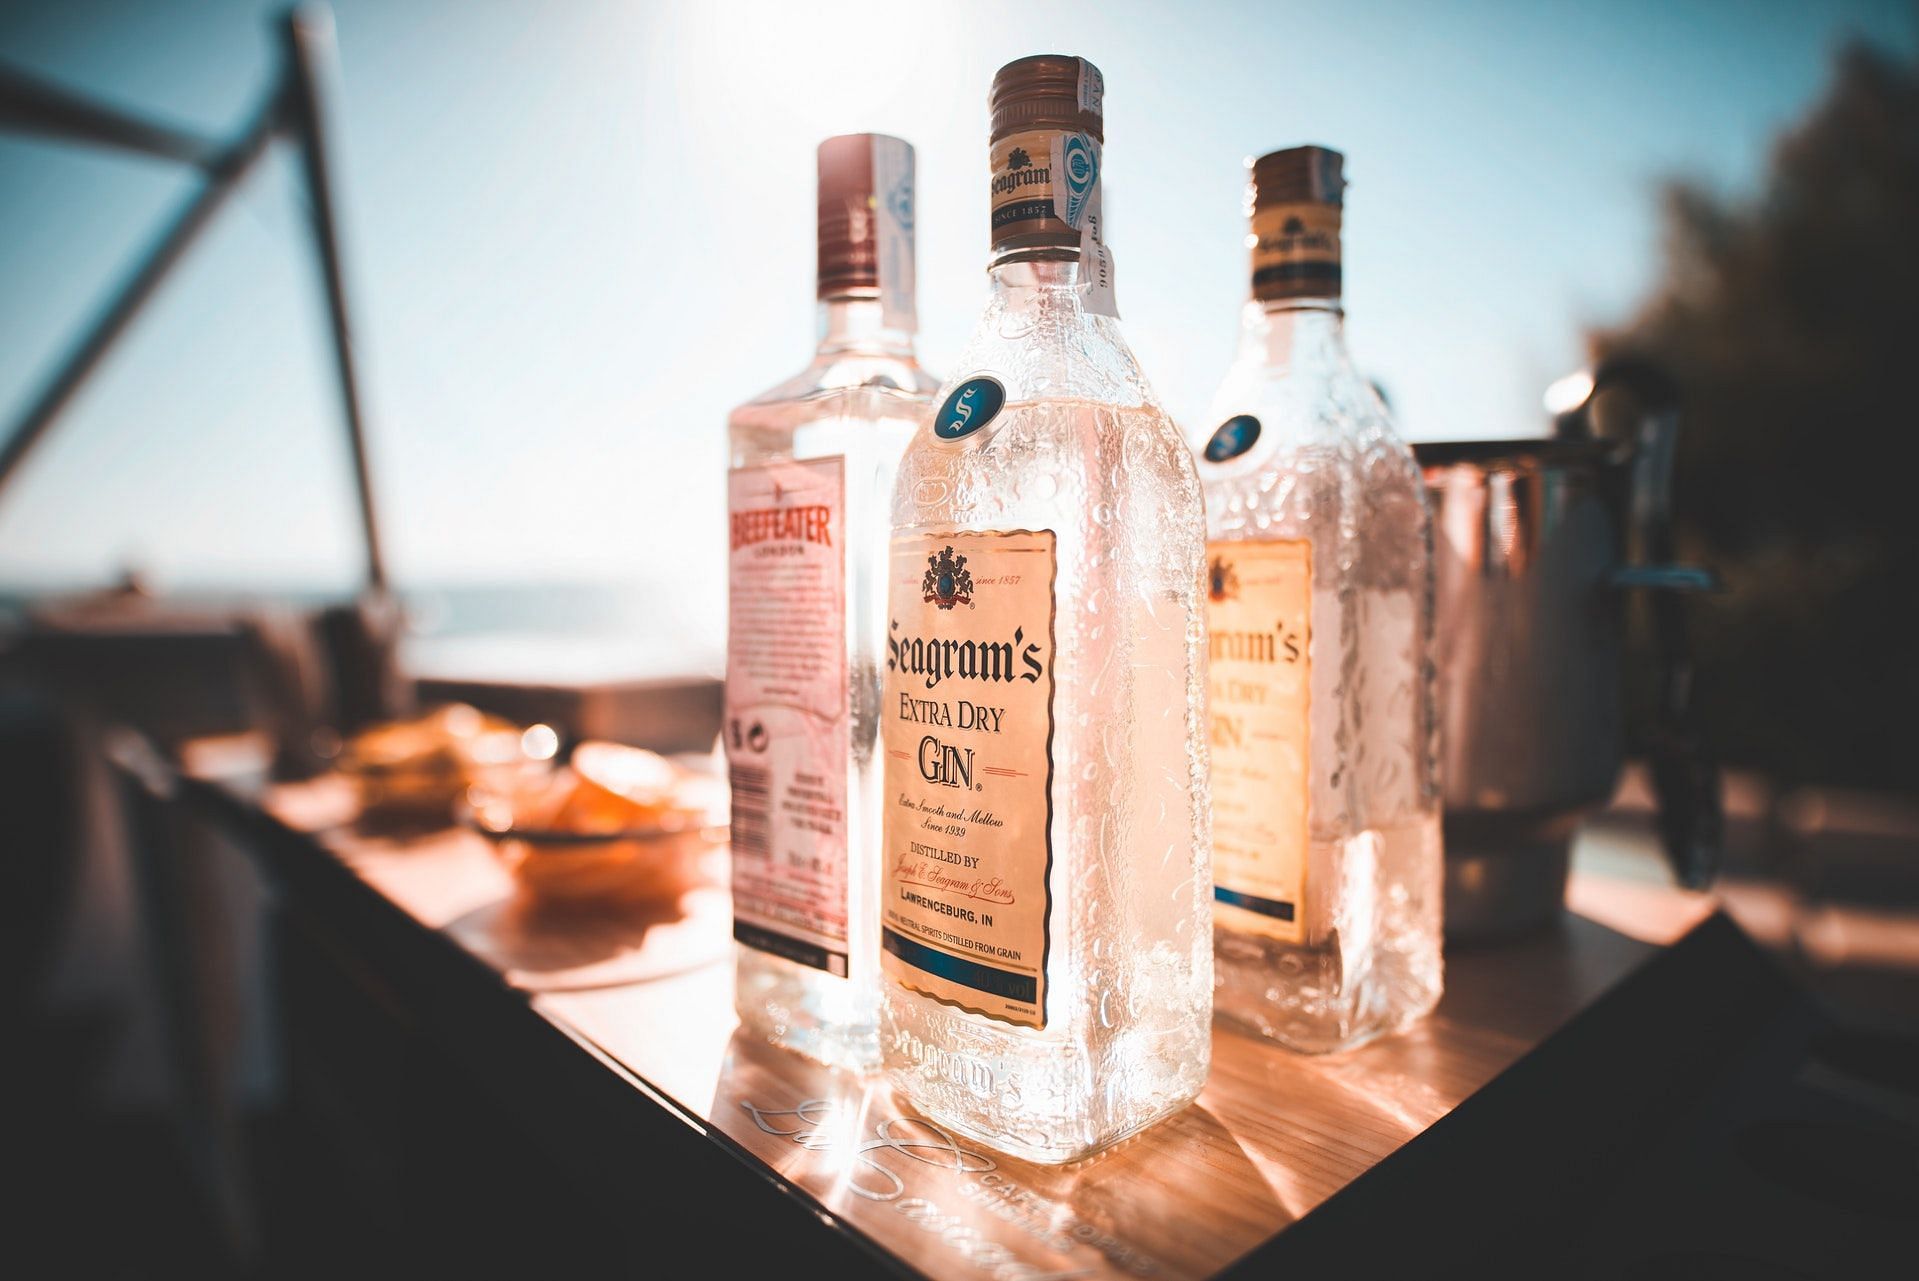 Can alcohol impair muscle growth? (Image via Pexels/Photo by Alem S&aacute;nchez)